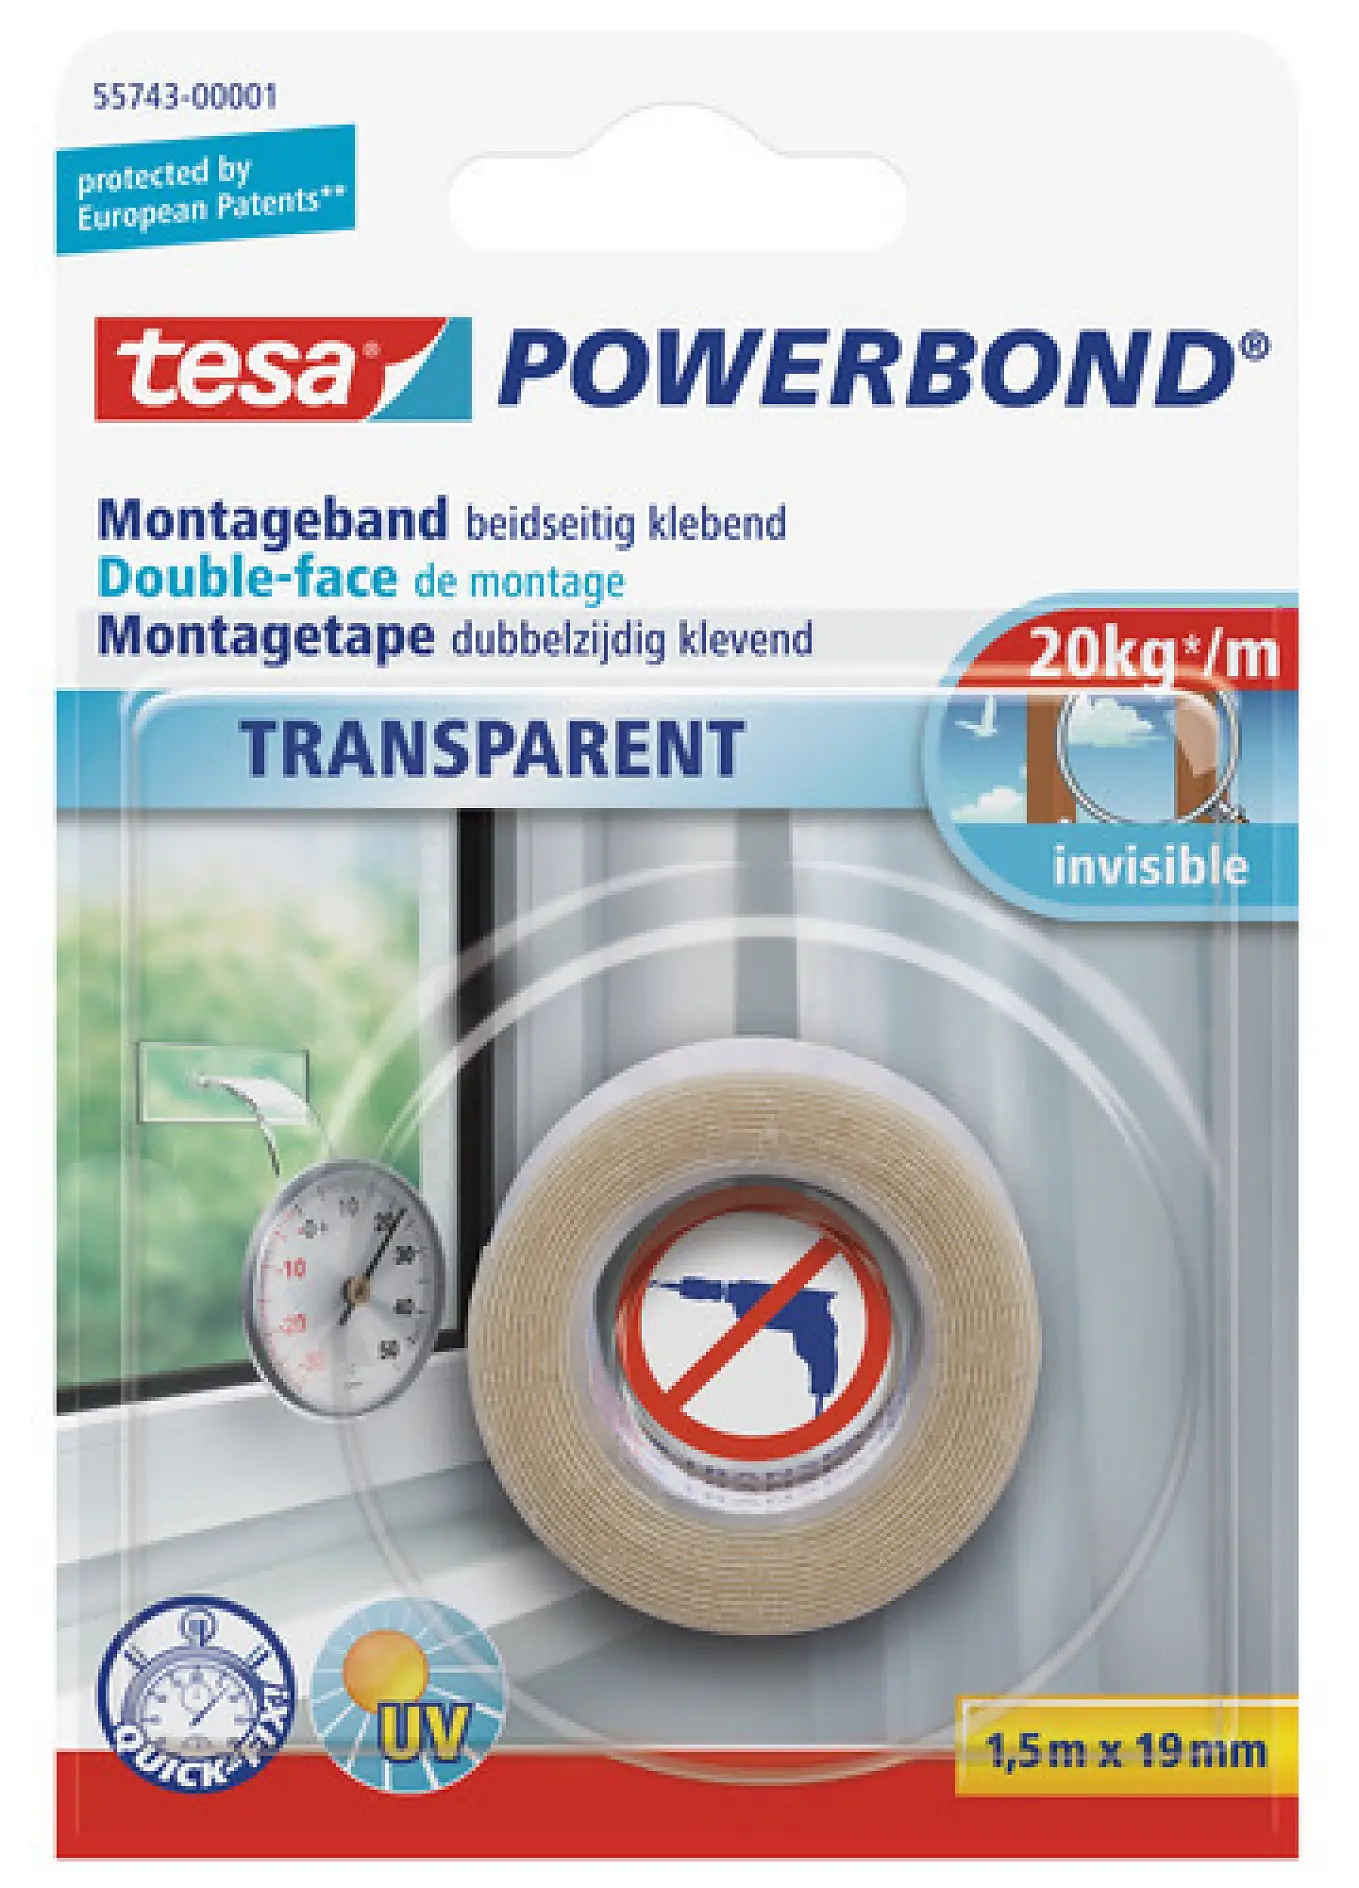 tesa® Powerbond TRANSPARENT is a versatile mounting tape for many indoor applications. The double-sided self-adhesive tape is perfectly suited to fix any transparent object or anything that needs to be attached to a transparent surface. It is crystal clear and extra thin and will stick to any flat surface made of materials such as glass, tiles, wood and most plastics. In good bonding conditions, a strip of just 10 cm is enough to hold a weight of up to 2 kg.